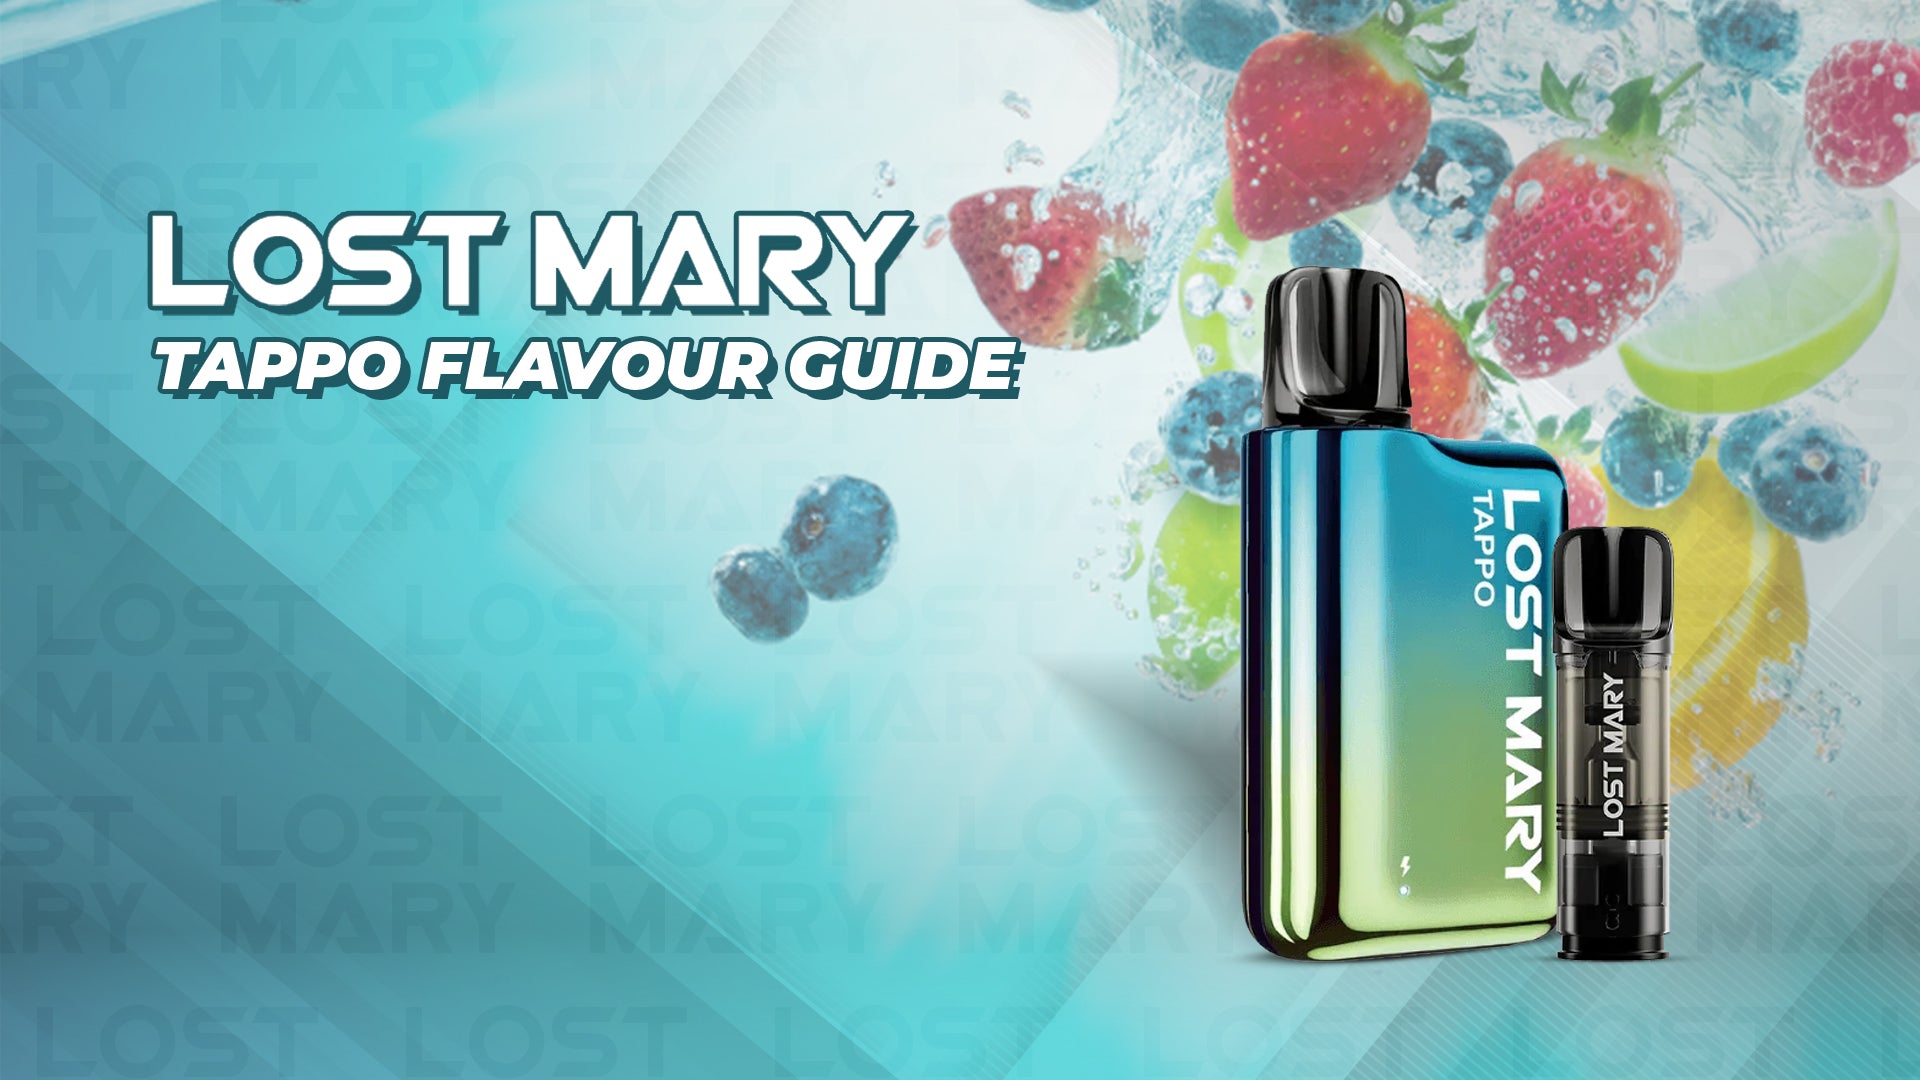 Lost Mary Tappo Flavour Guide